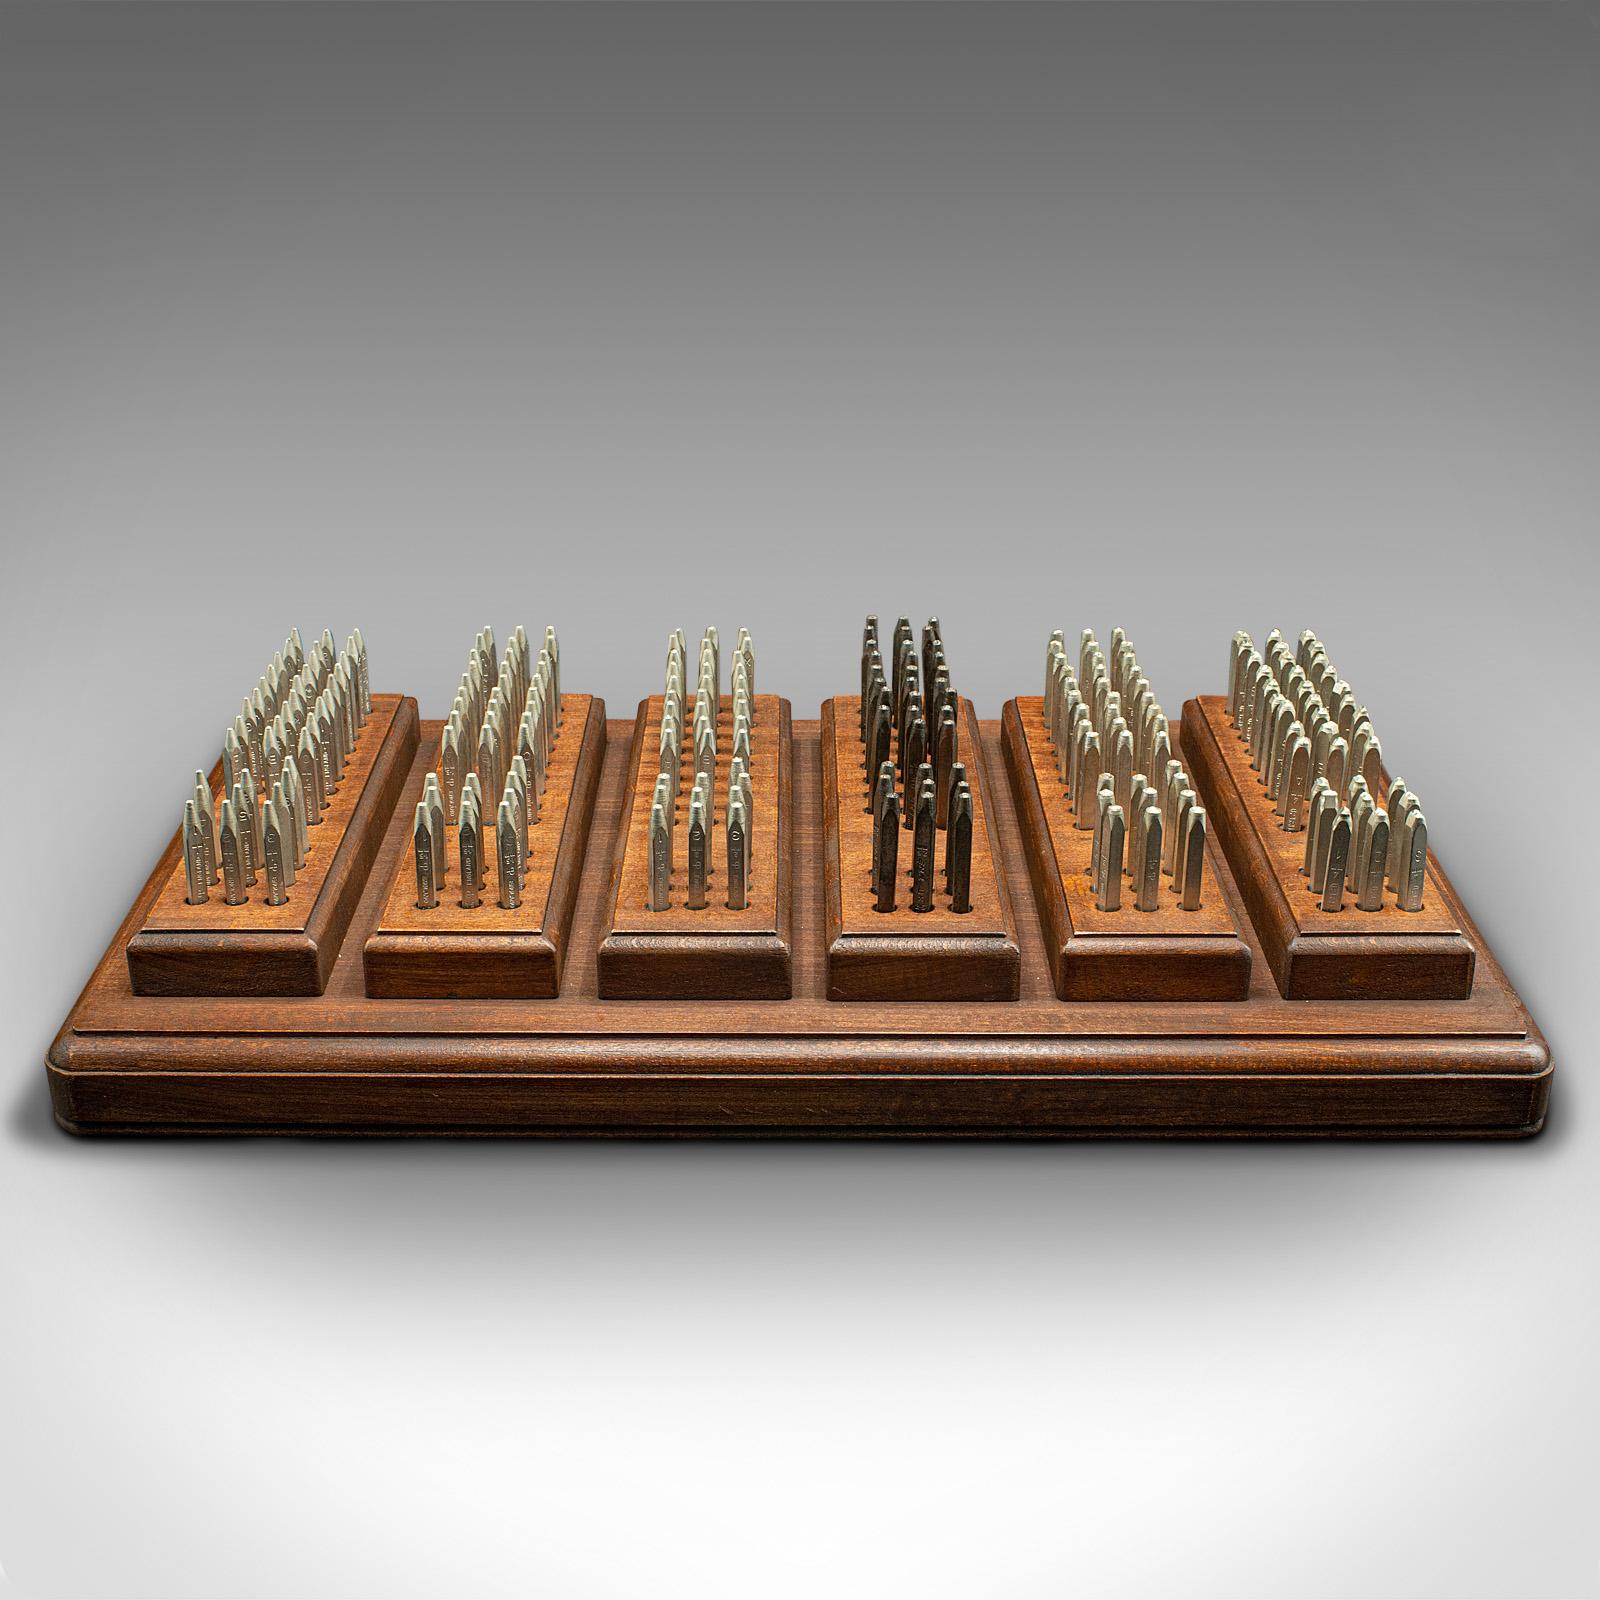 This is an antique engineer's letter punch set. An English, mahogany tool block, dating to the Victorian period and later, circa 1900.

Fascinating master craftsman's caddy, for the exceptional workshop
Displaying a desirable aged patina and in